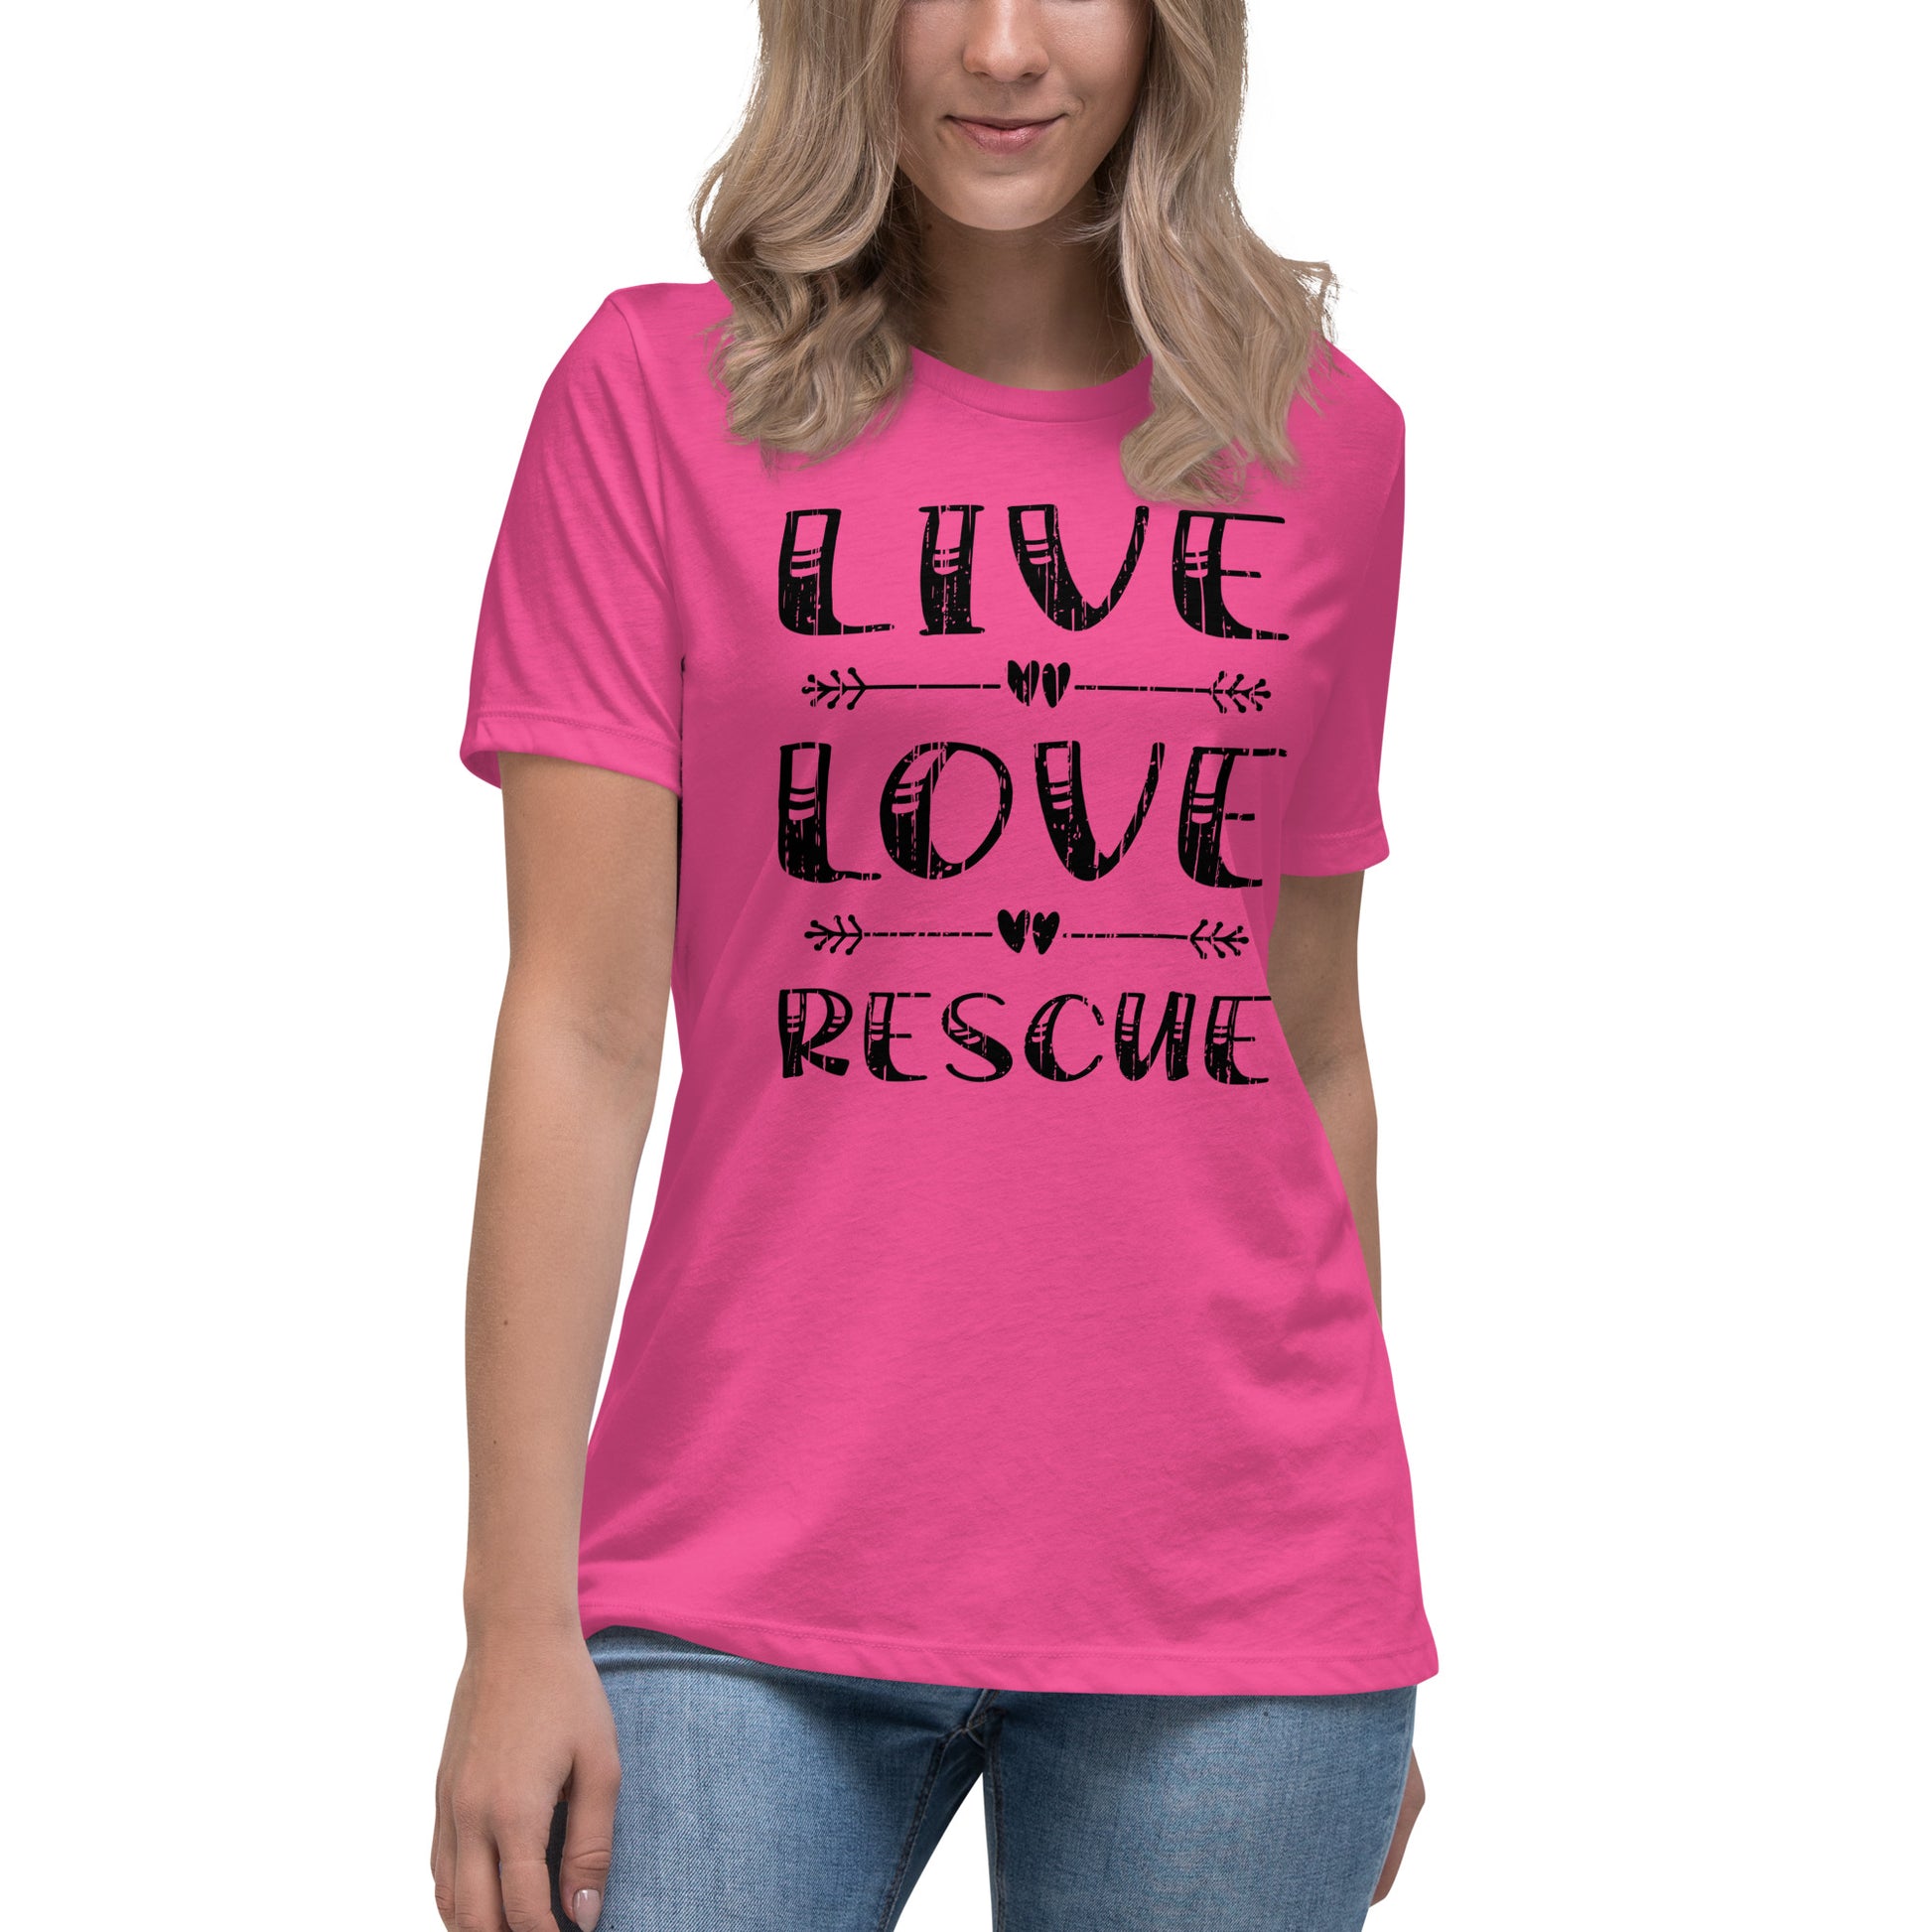 Live love rescue women’s relaxed fit t-shirts by Dog Artistry berry color